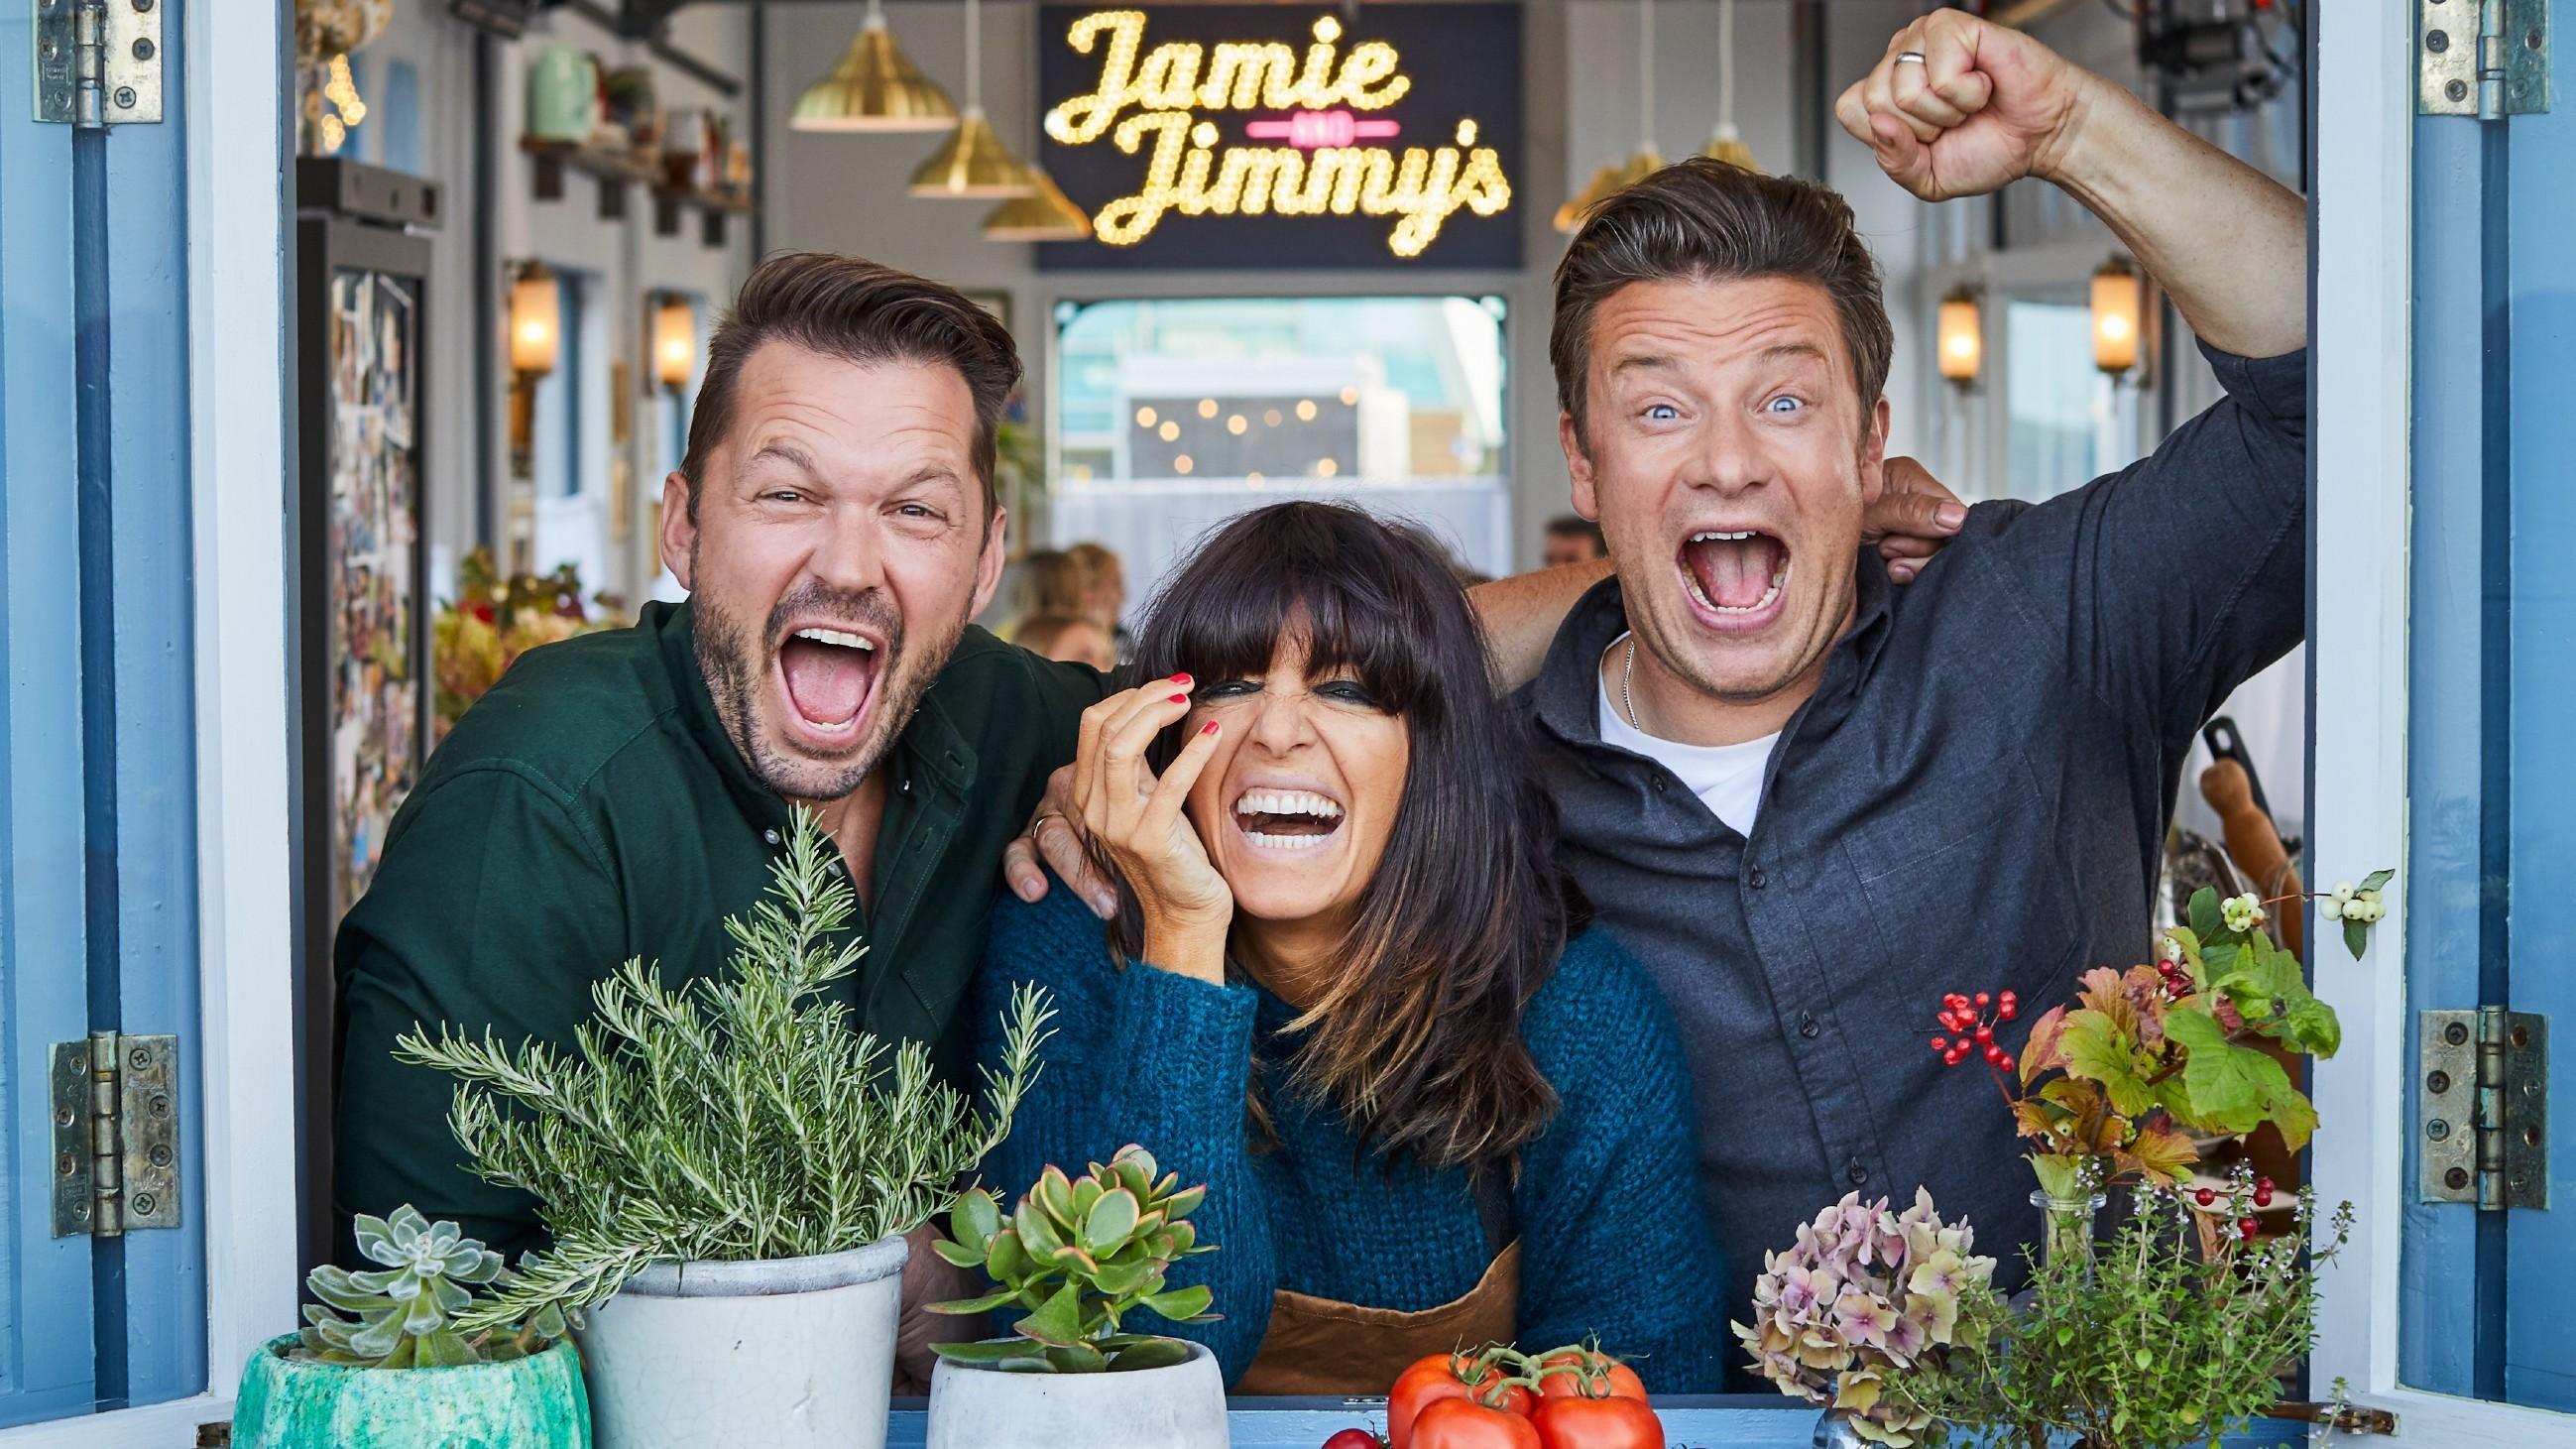 Jamie and Jimmy's Food Fight Club